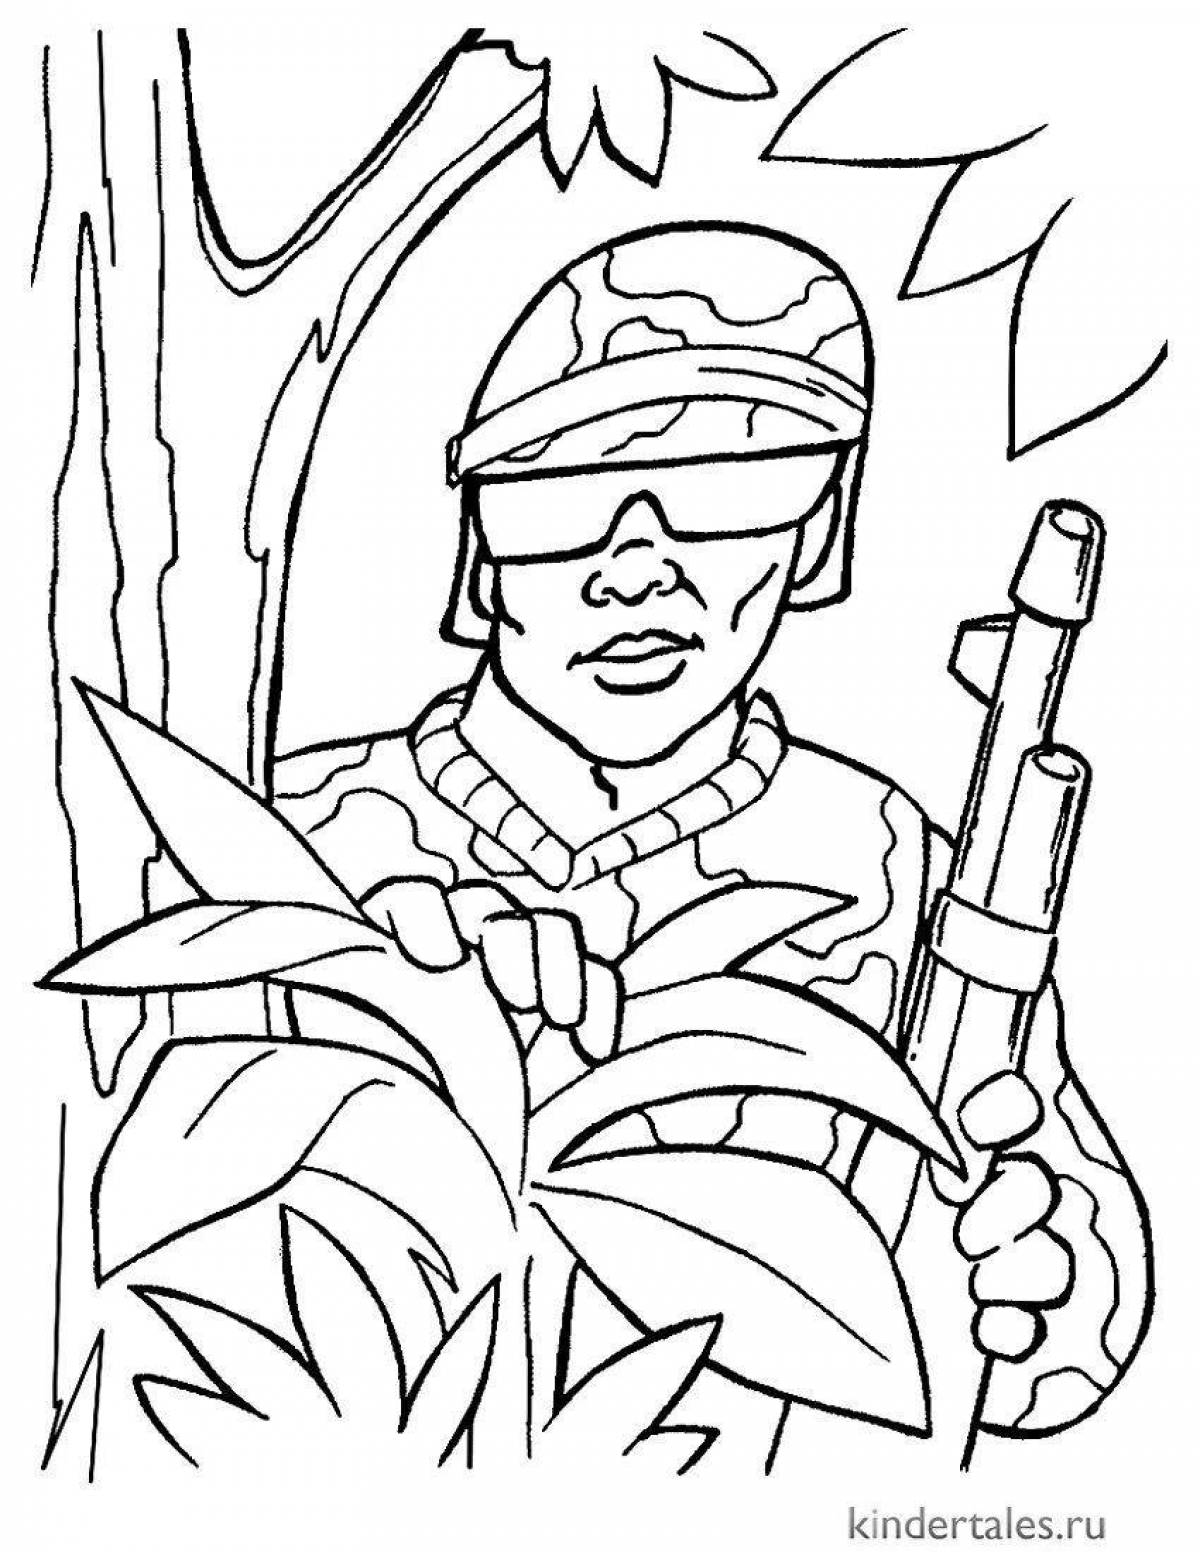 Dynamic soldier drawing for kids